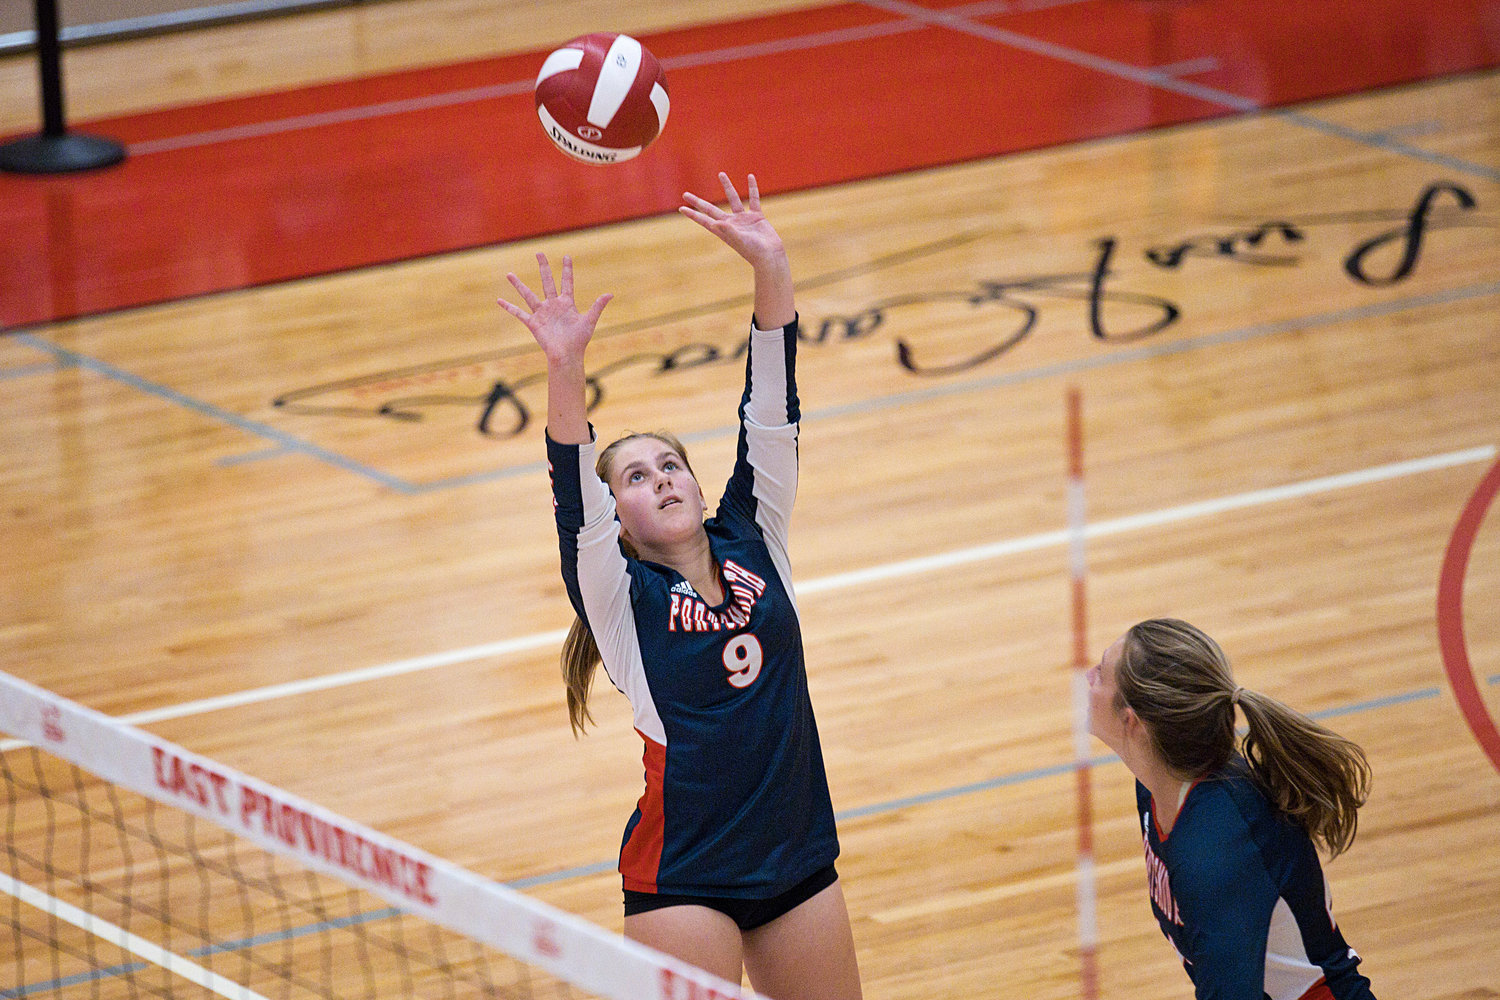 Caitlin Mediate sets the ball to a teammate while rallying against the Townies.